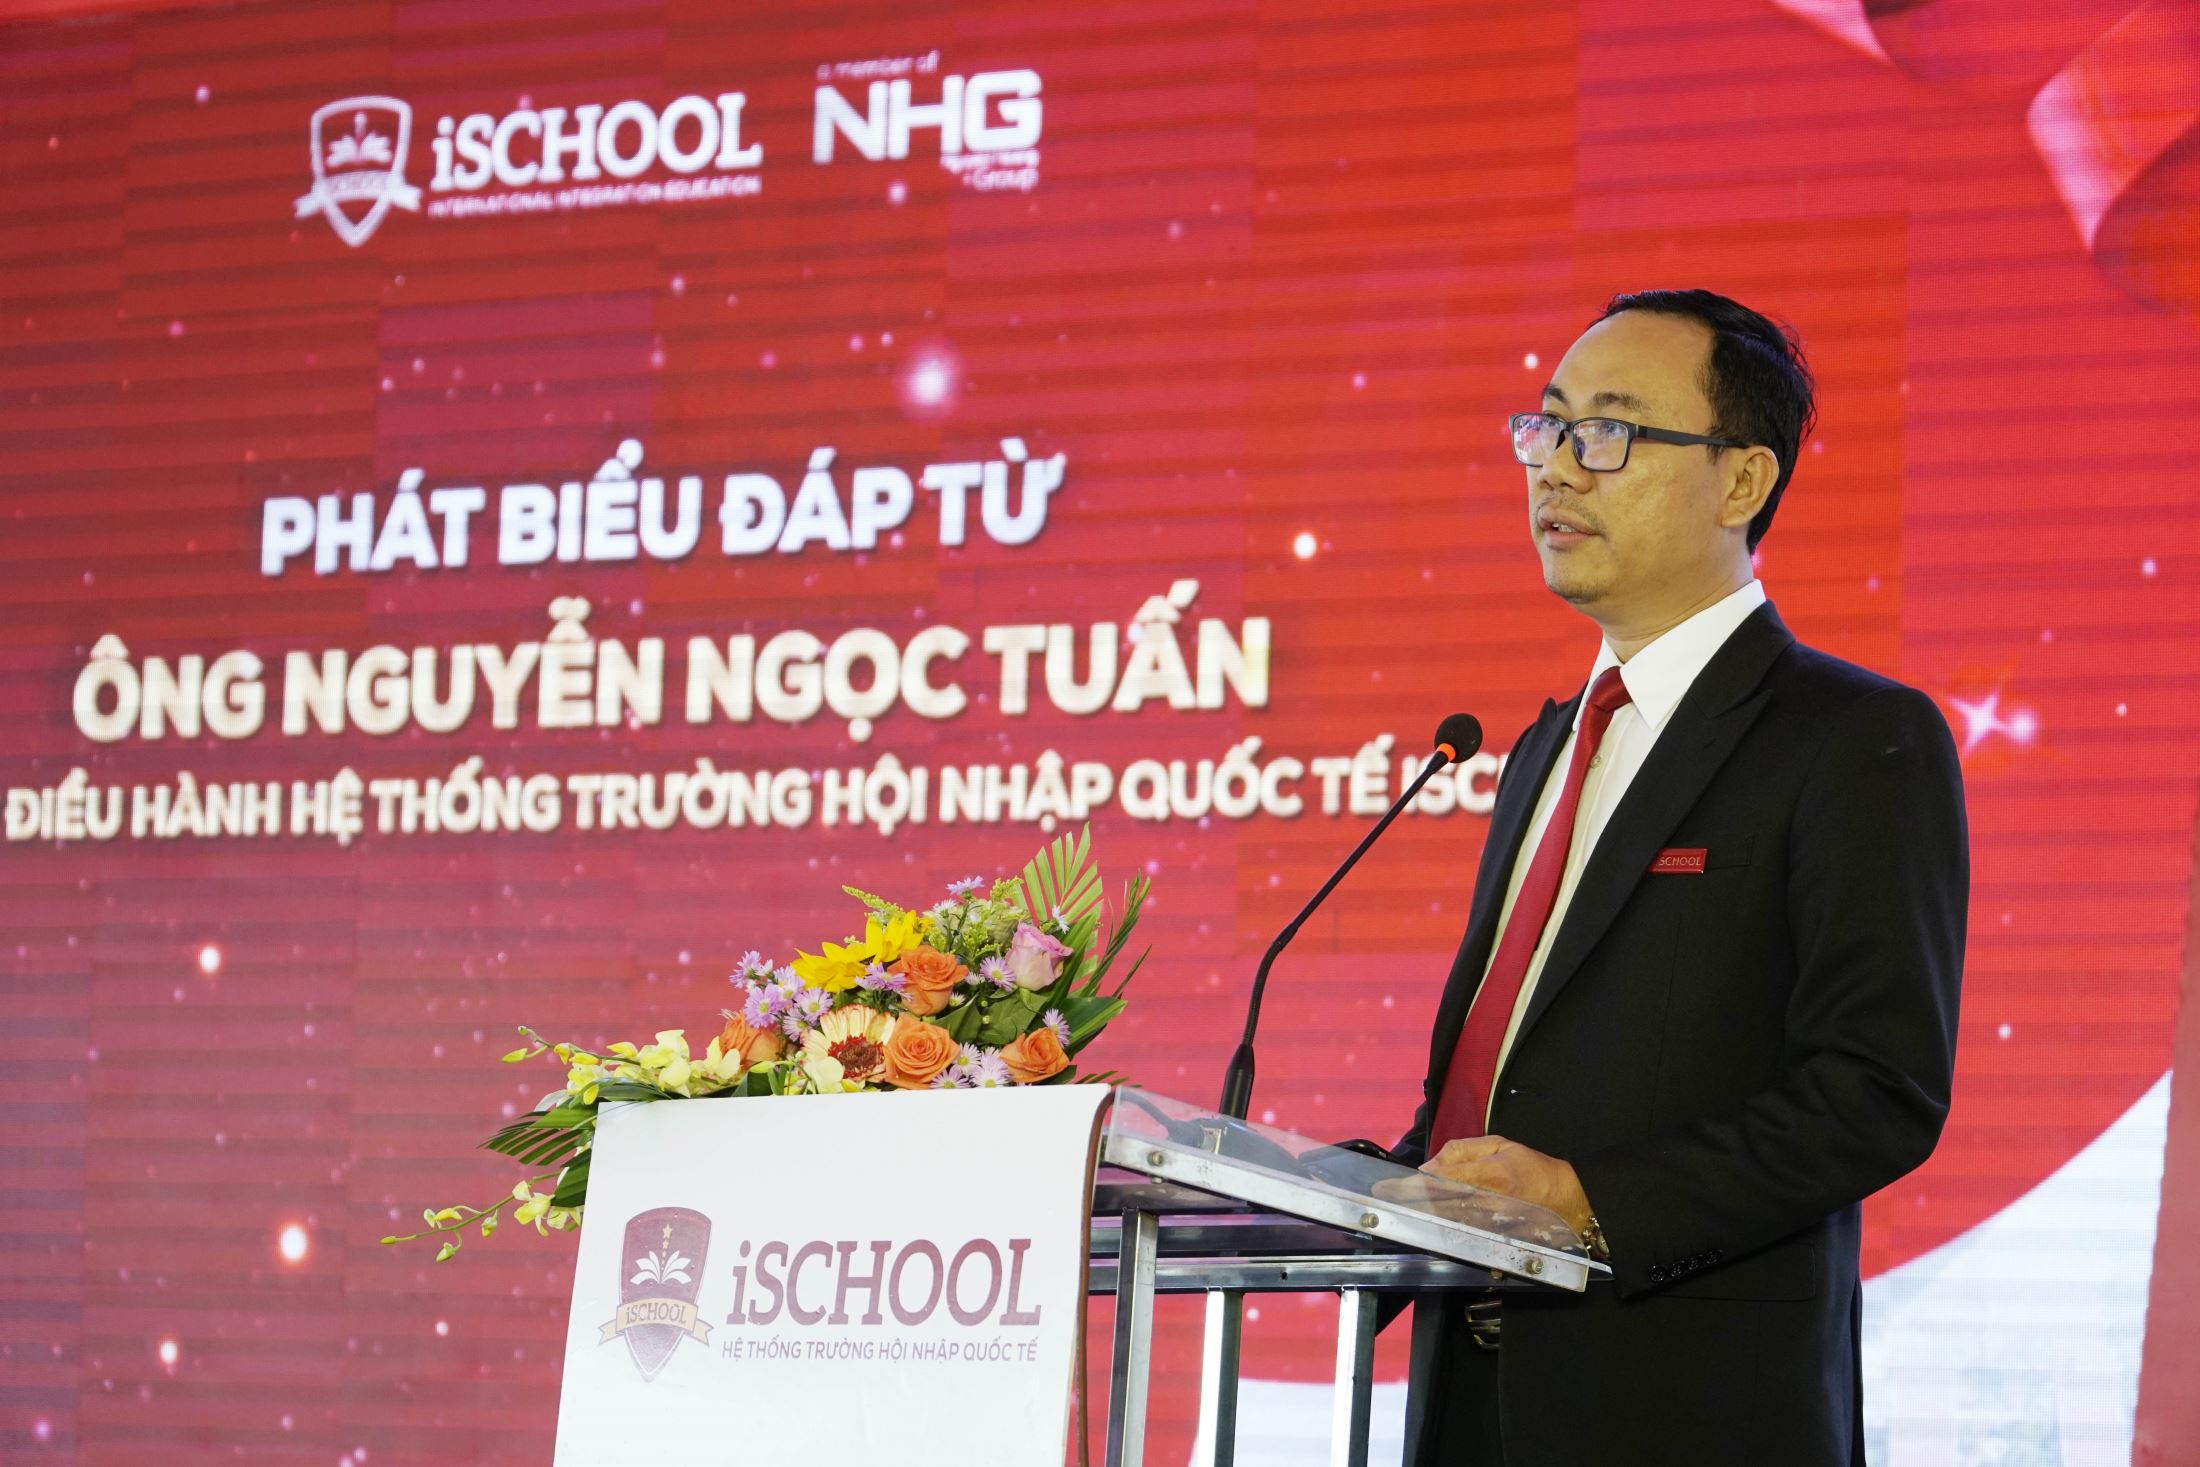 Mr. Nguyen Ngoc Tuan – Managing Director of the system of iSchool speaking at the ceremony